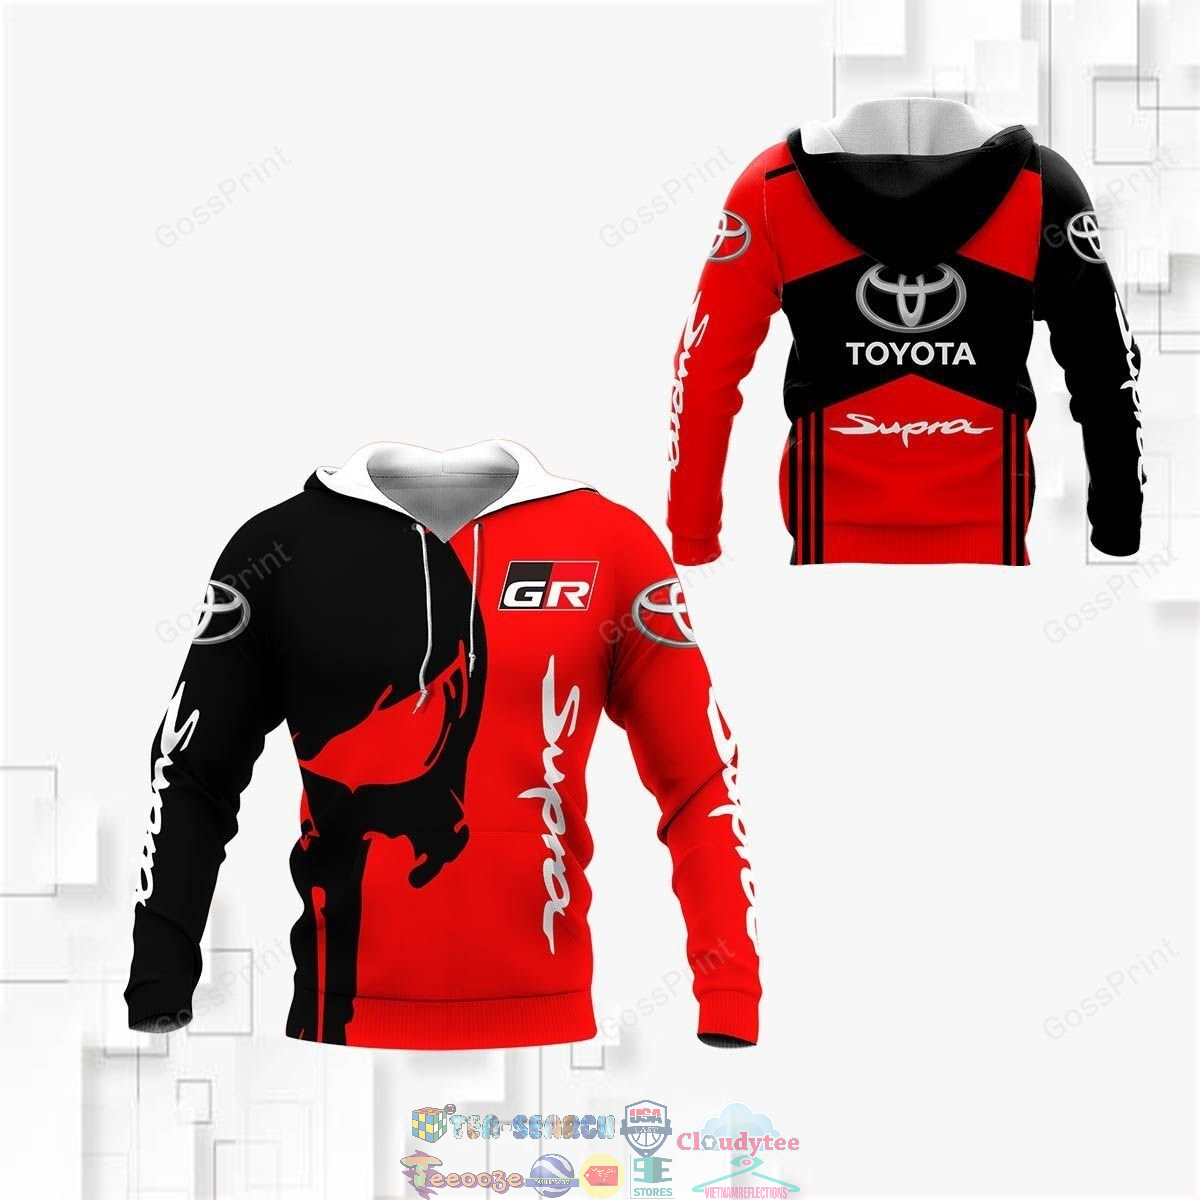 Toyota Supra ver 2 3D hoodie and t-shirt